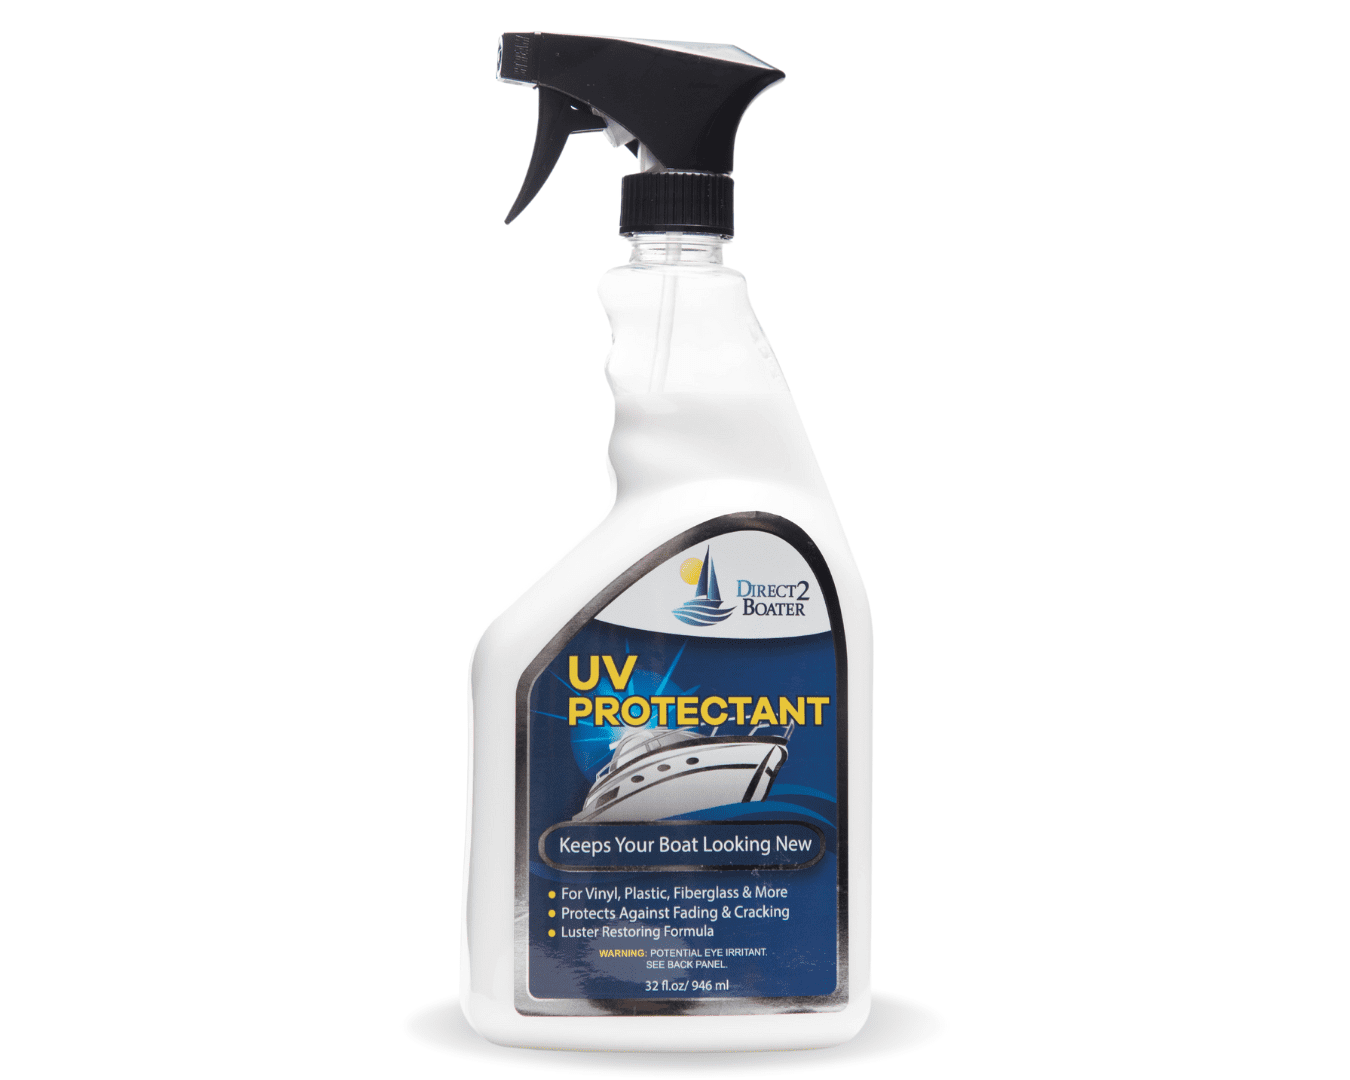 Mothers Protectant and VLR Vinyl-Leather-Rubber Care - 24oz Cleaning Kit